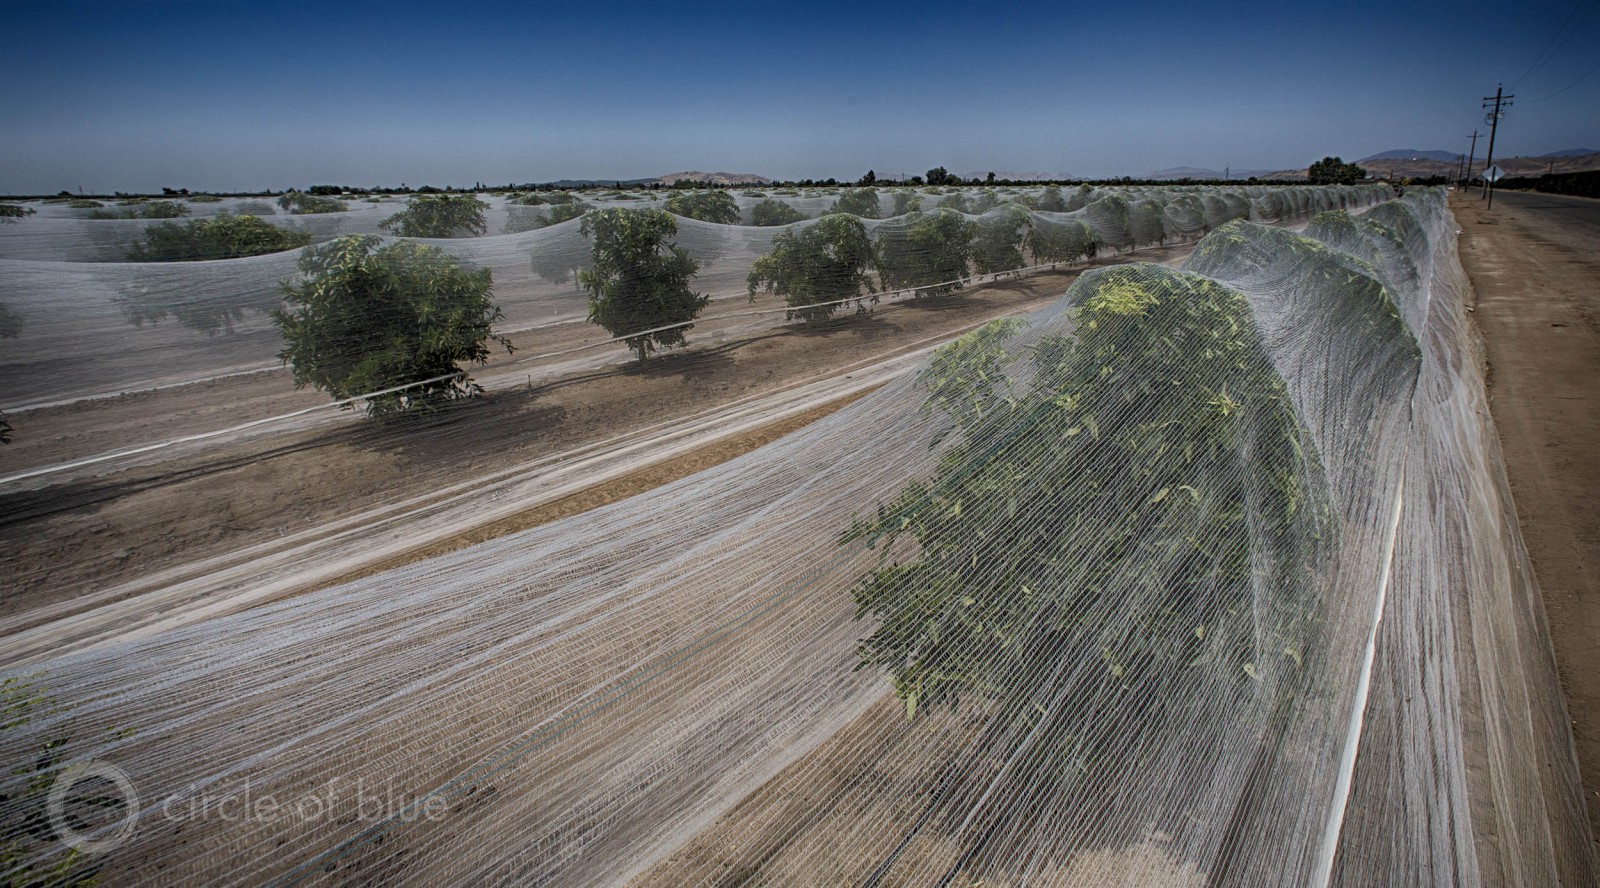 Production agriculture, based on single crops and huge water consumption, sustained big financial losses globally from droughts. Here an orange grove in California. Photo © J. Carl Ganter / Circle of Blue